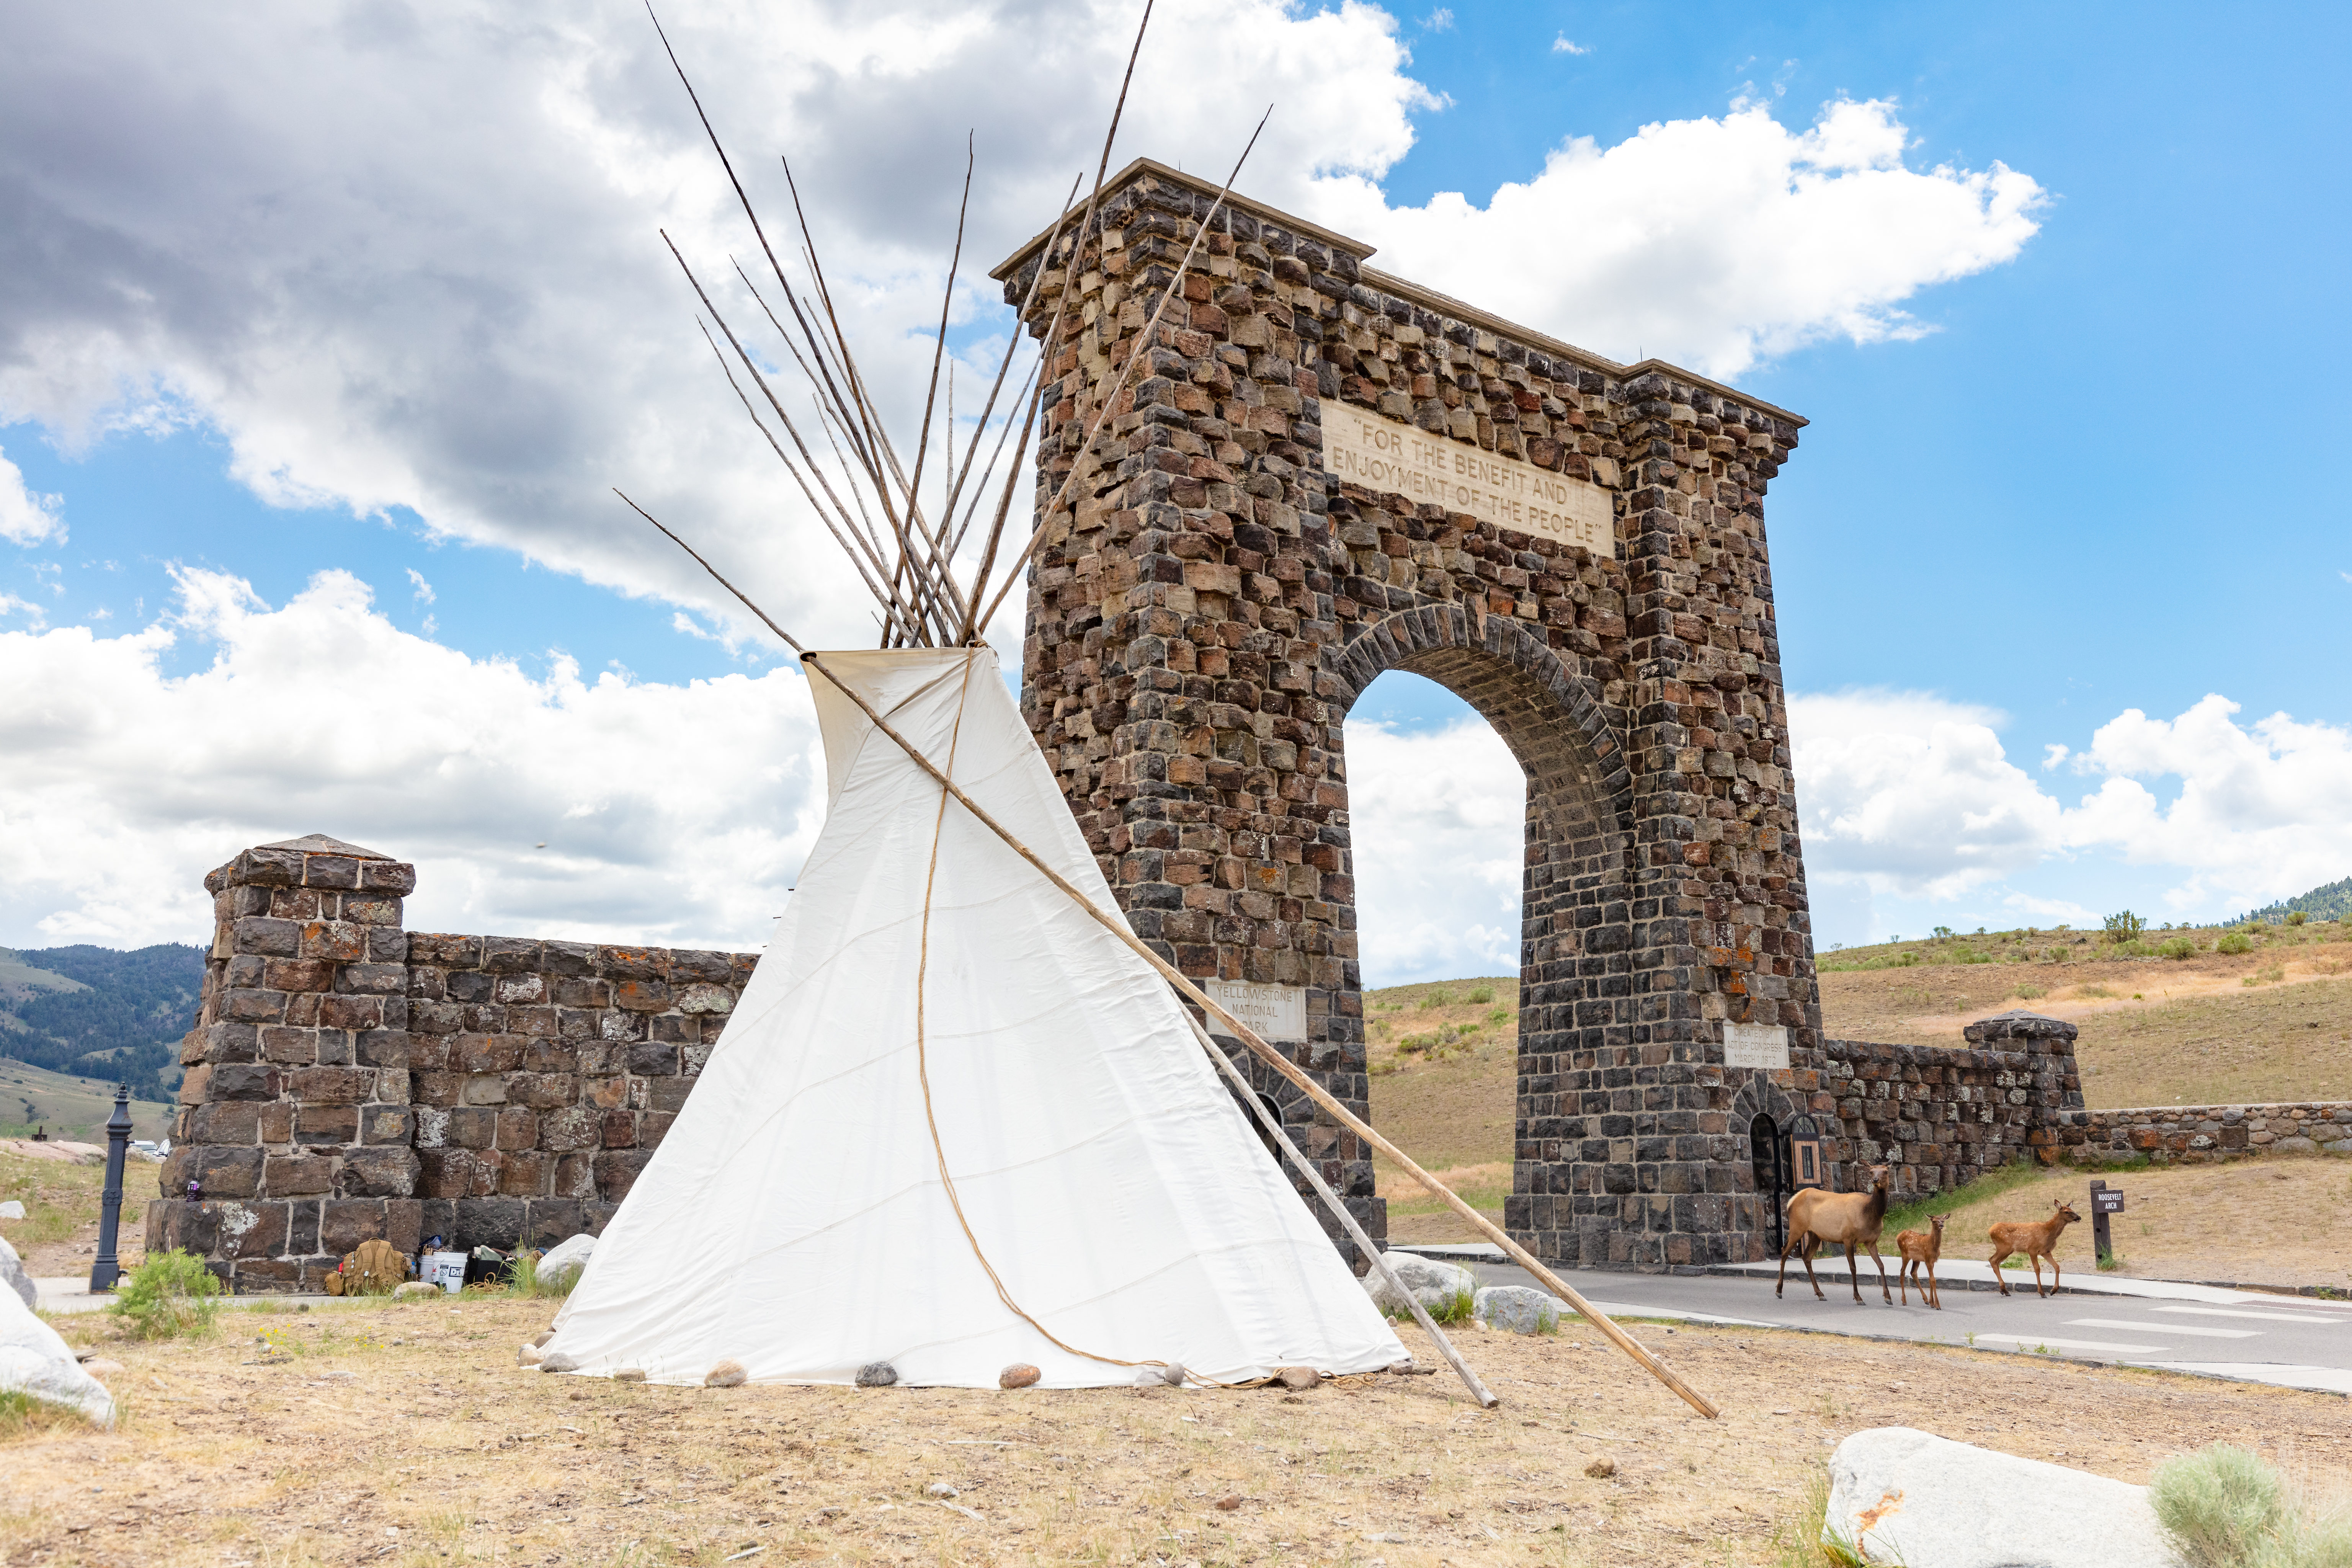 elk walking by a teepee next to a large stone archway